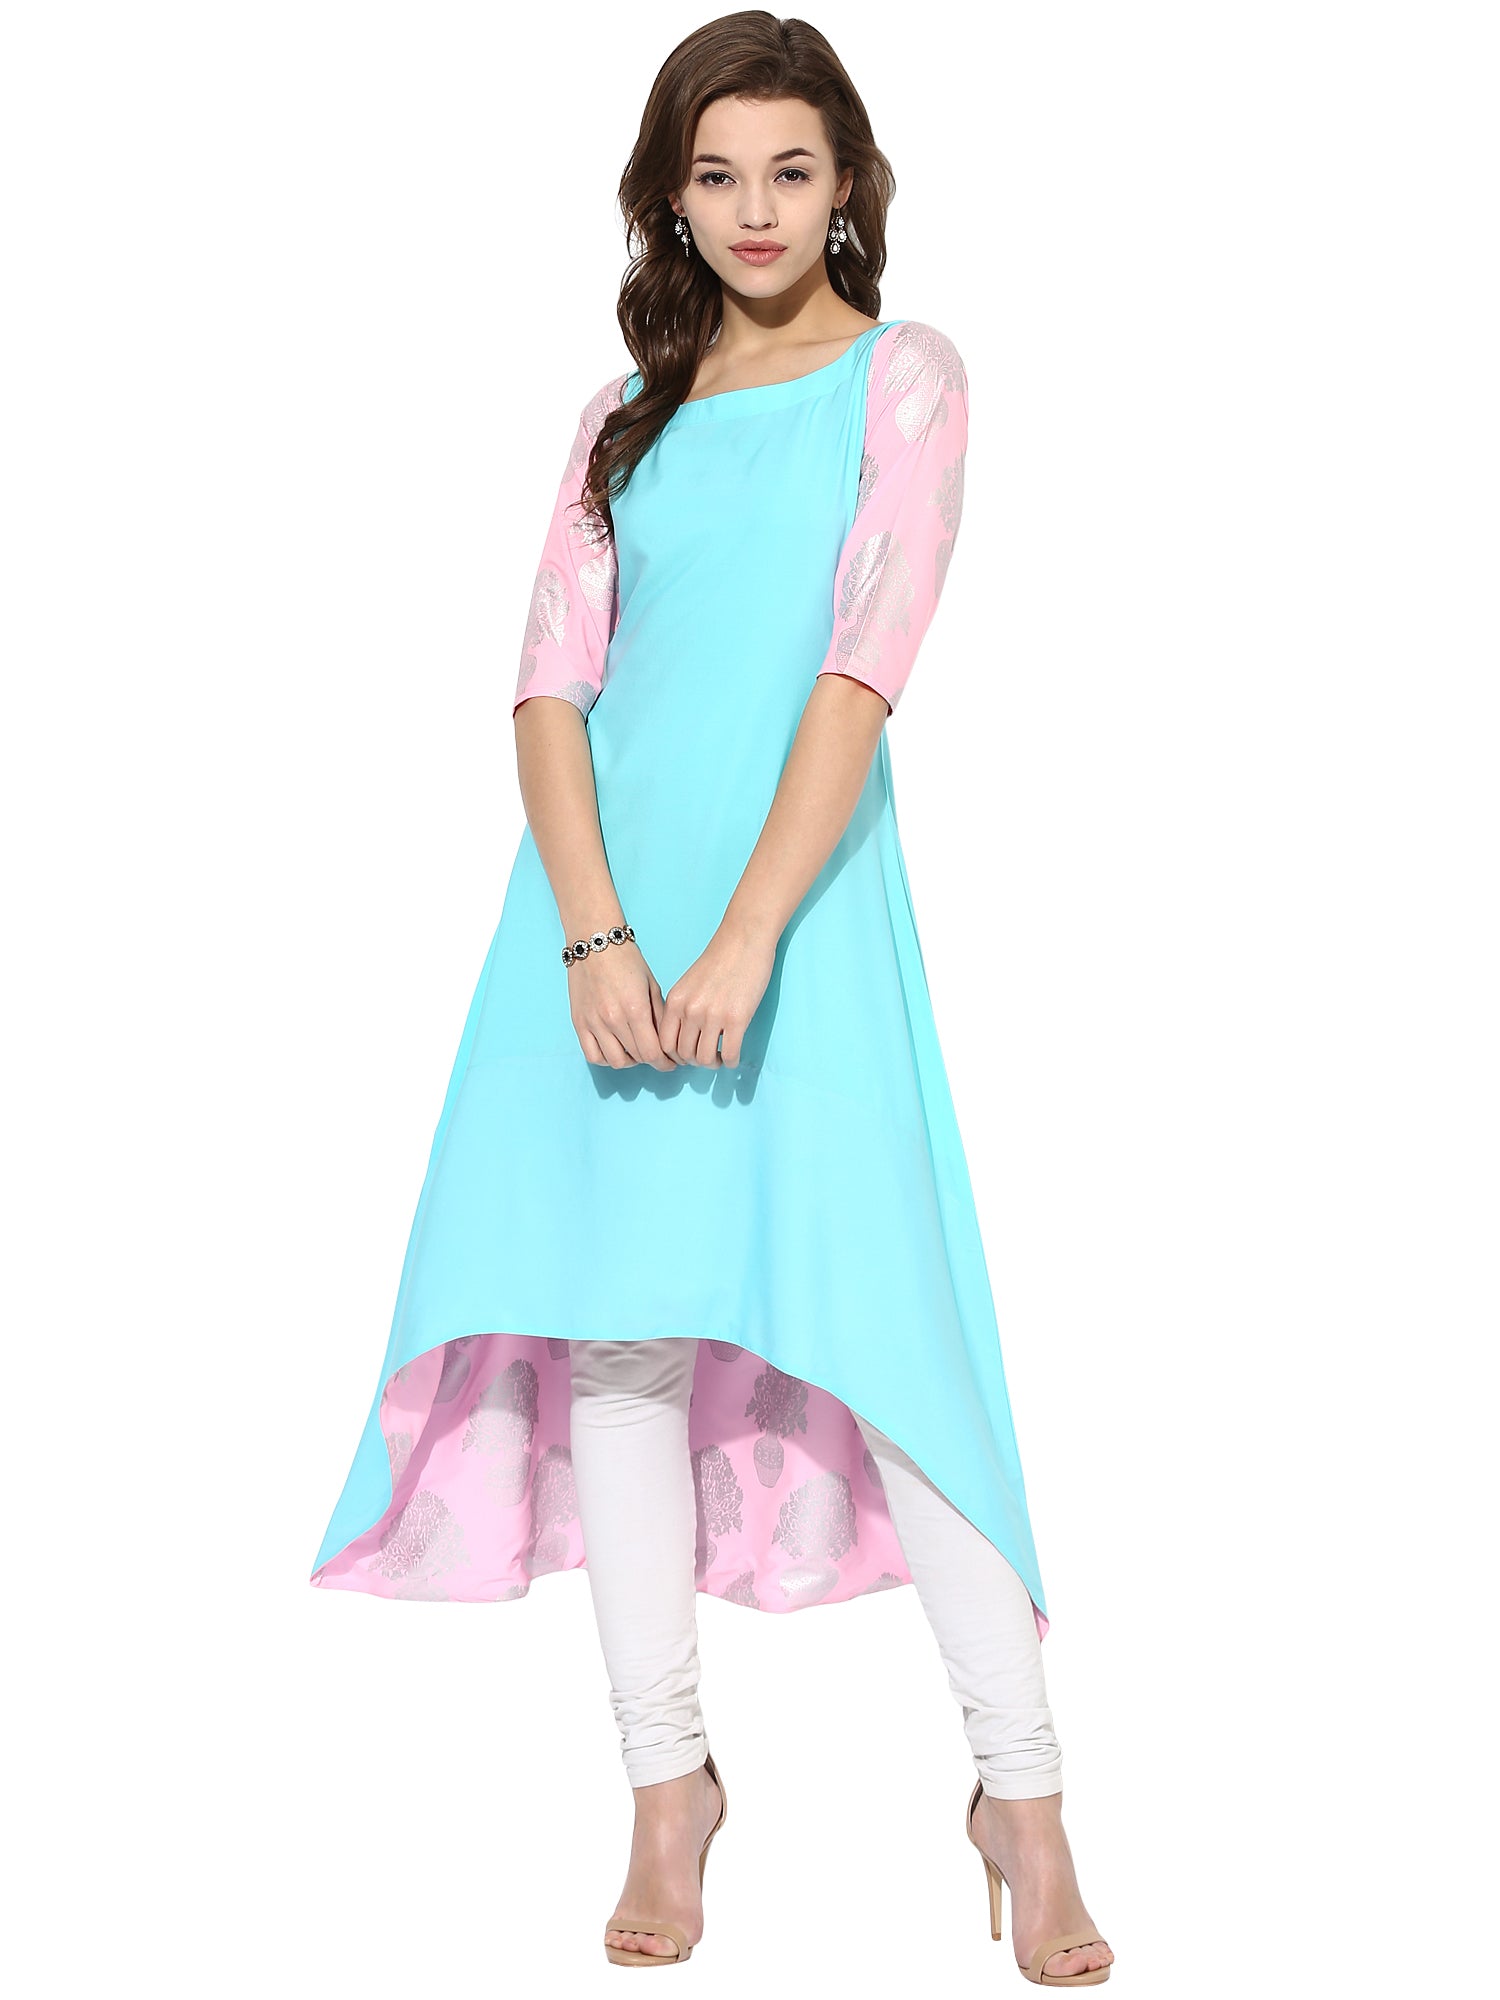 Women's Sky Blue Color Short Sleeve And Boat Neck Crepe Only Kurti - Ahalyaa